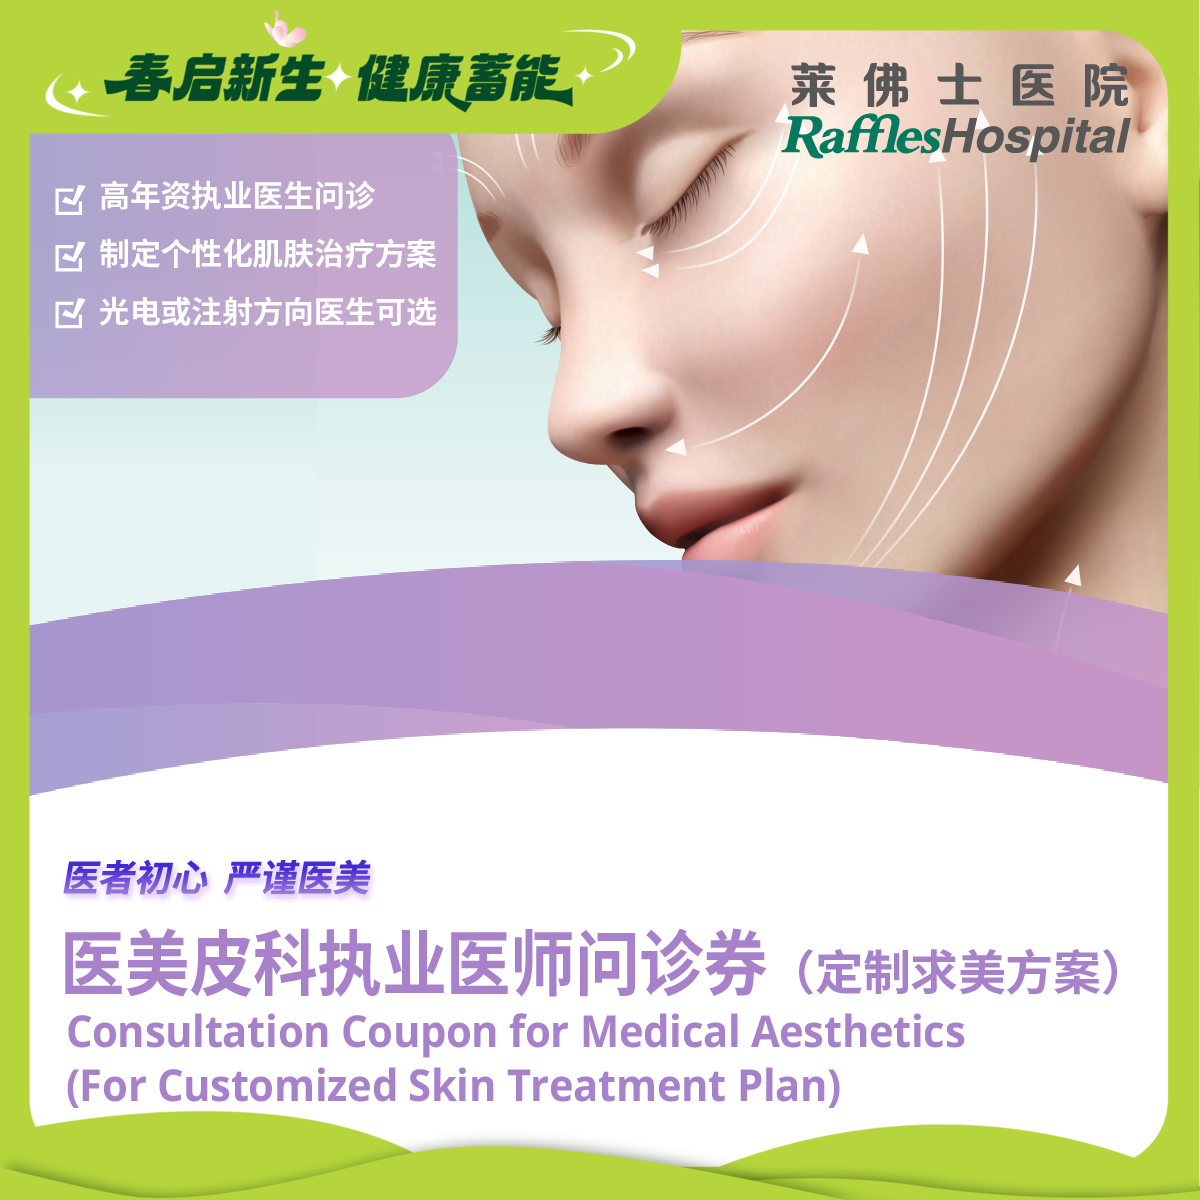 Raffles Hospital Beijing - Special Offer Packages - Consultation coupon for Medical Aesthetics (For Customised Skin Treatment Plan)